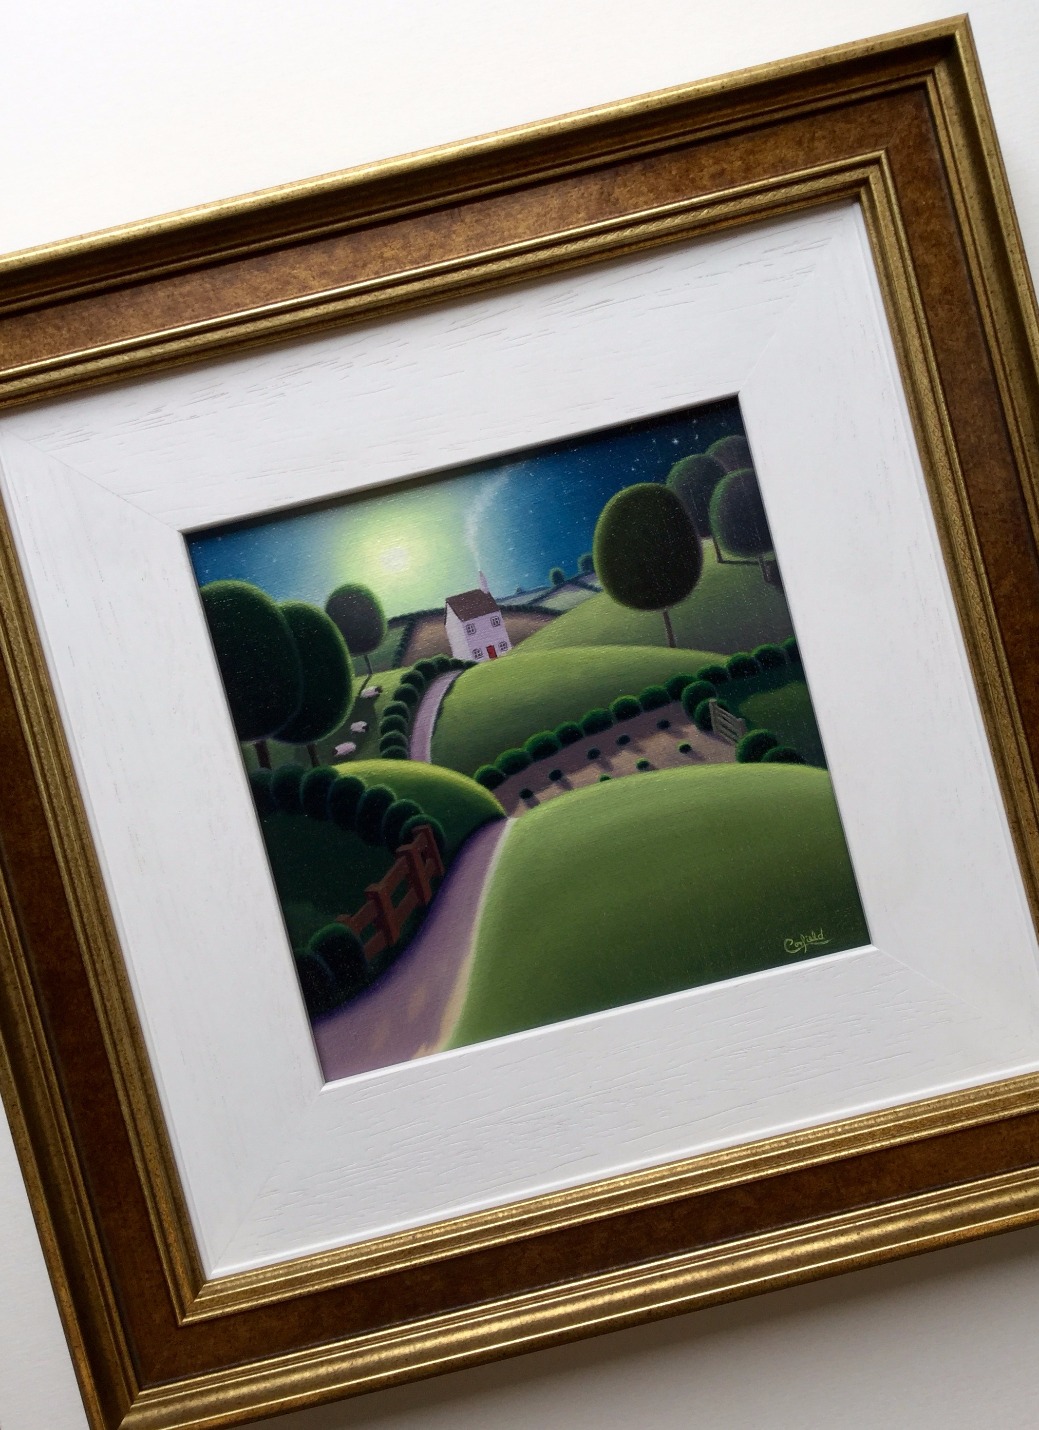 The Way Home by Paul Corfield, Landscape | Abstract